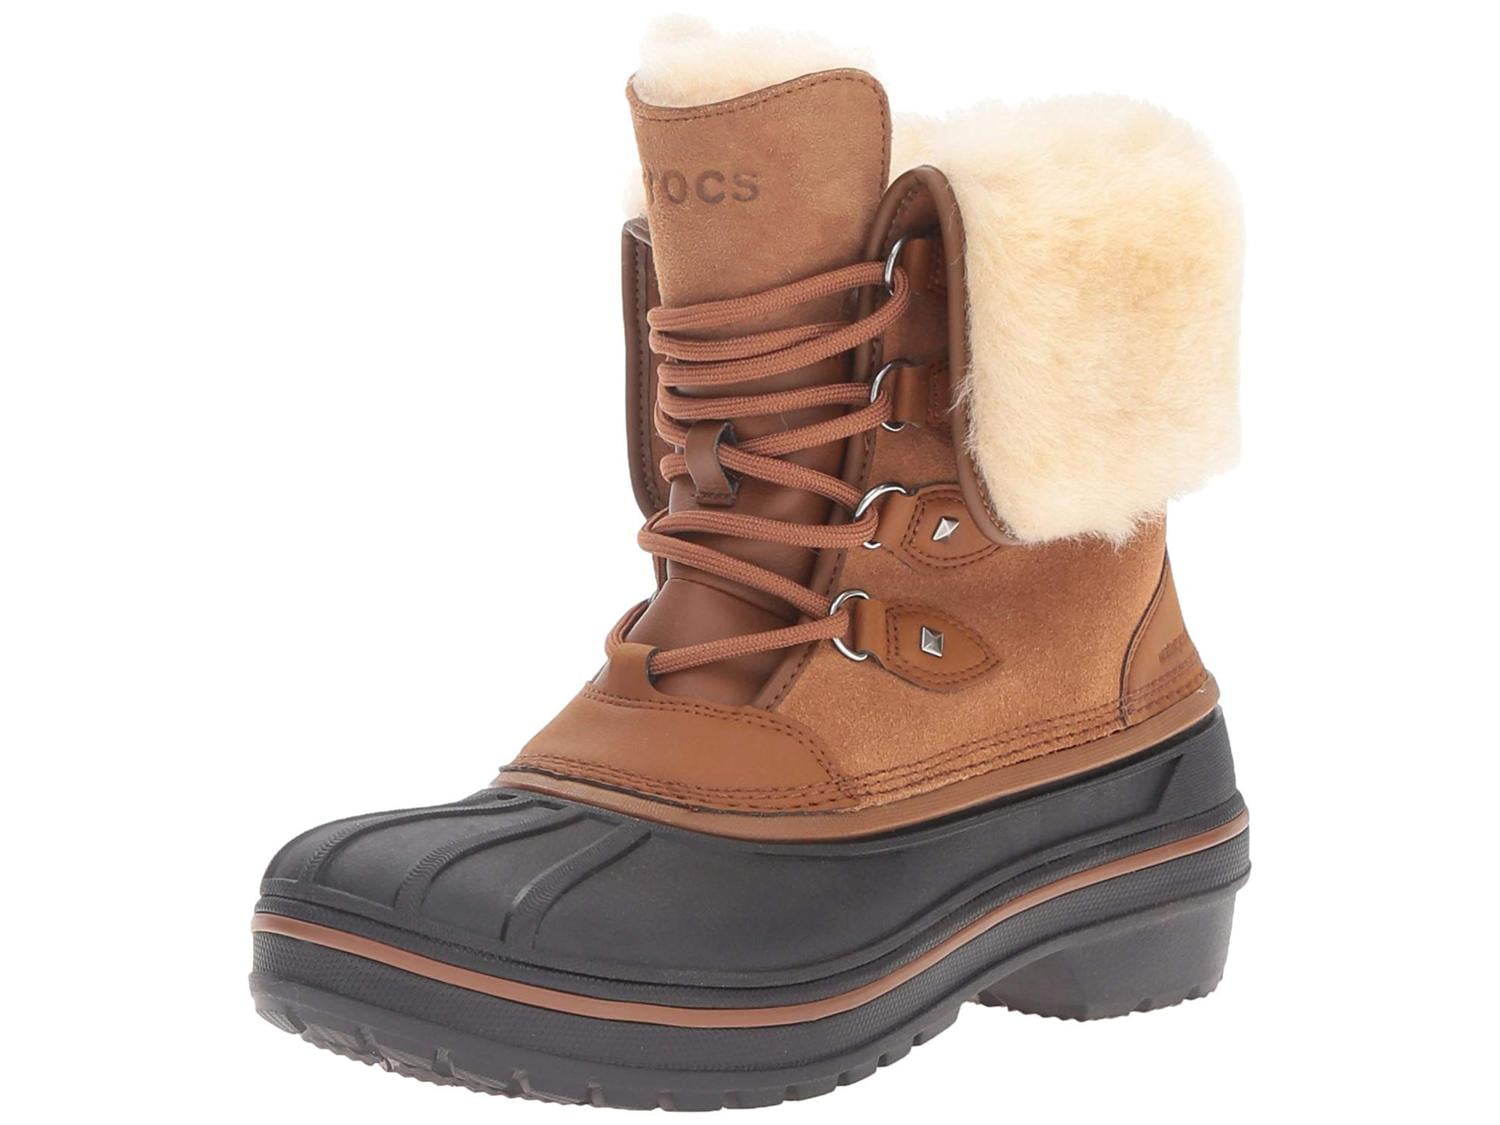 crocs boots with fur